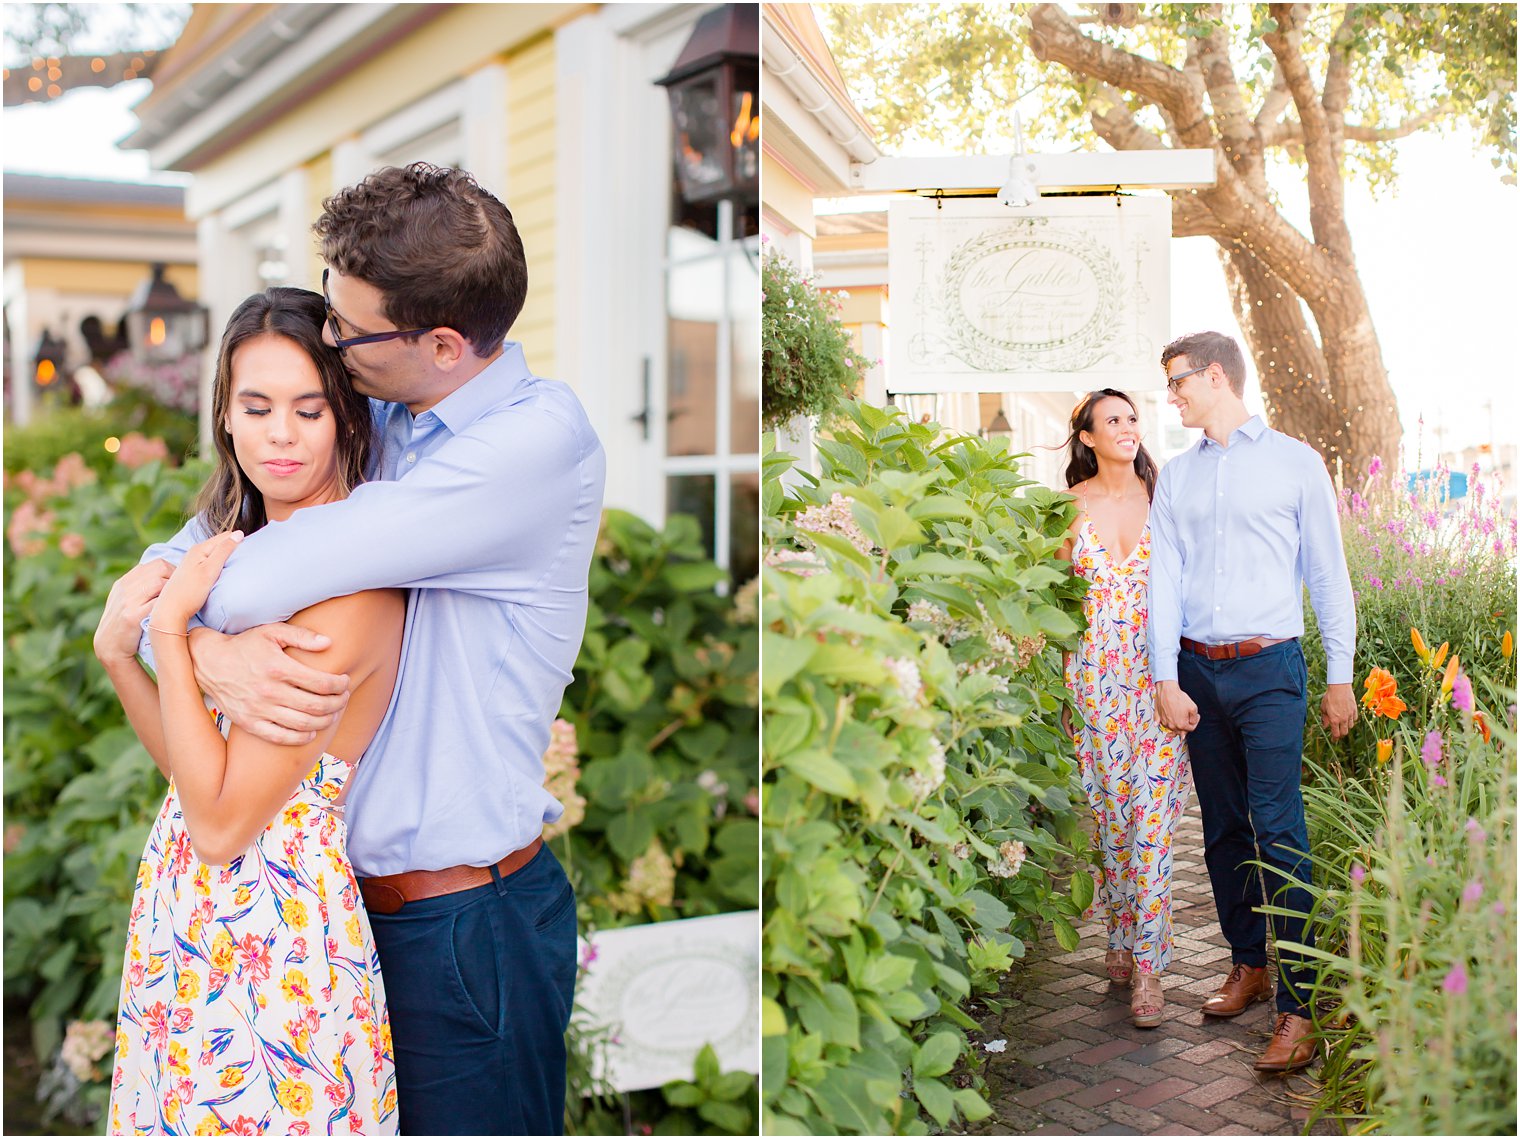 Engagement photos at The Gables on LBI